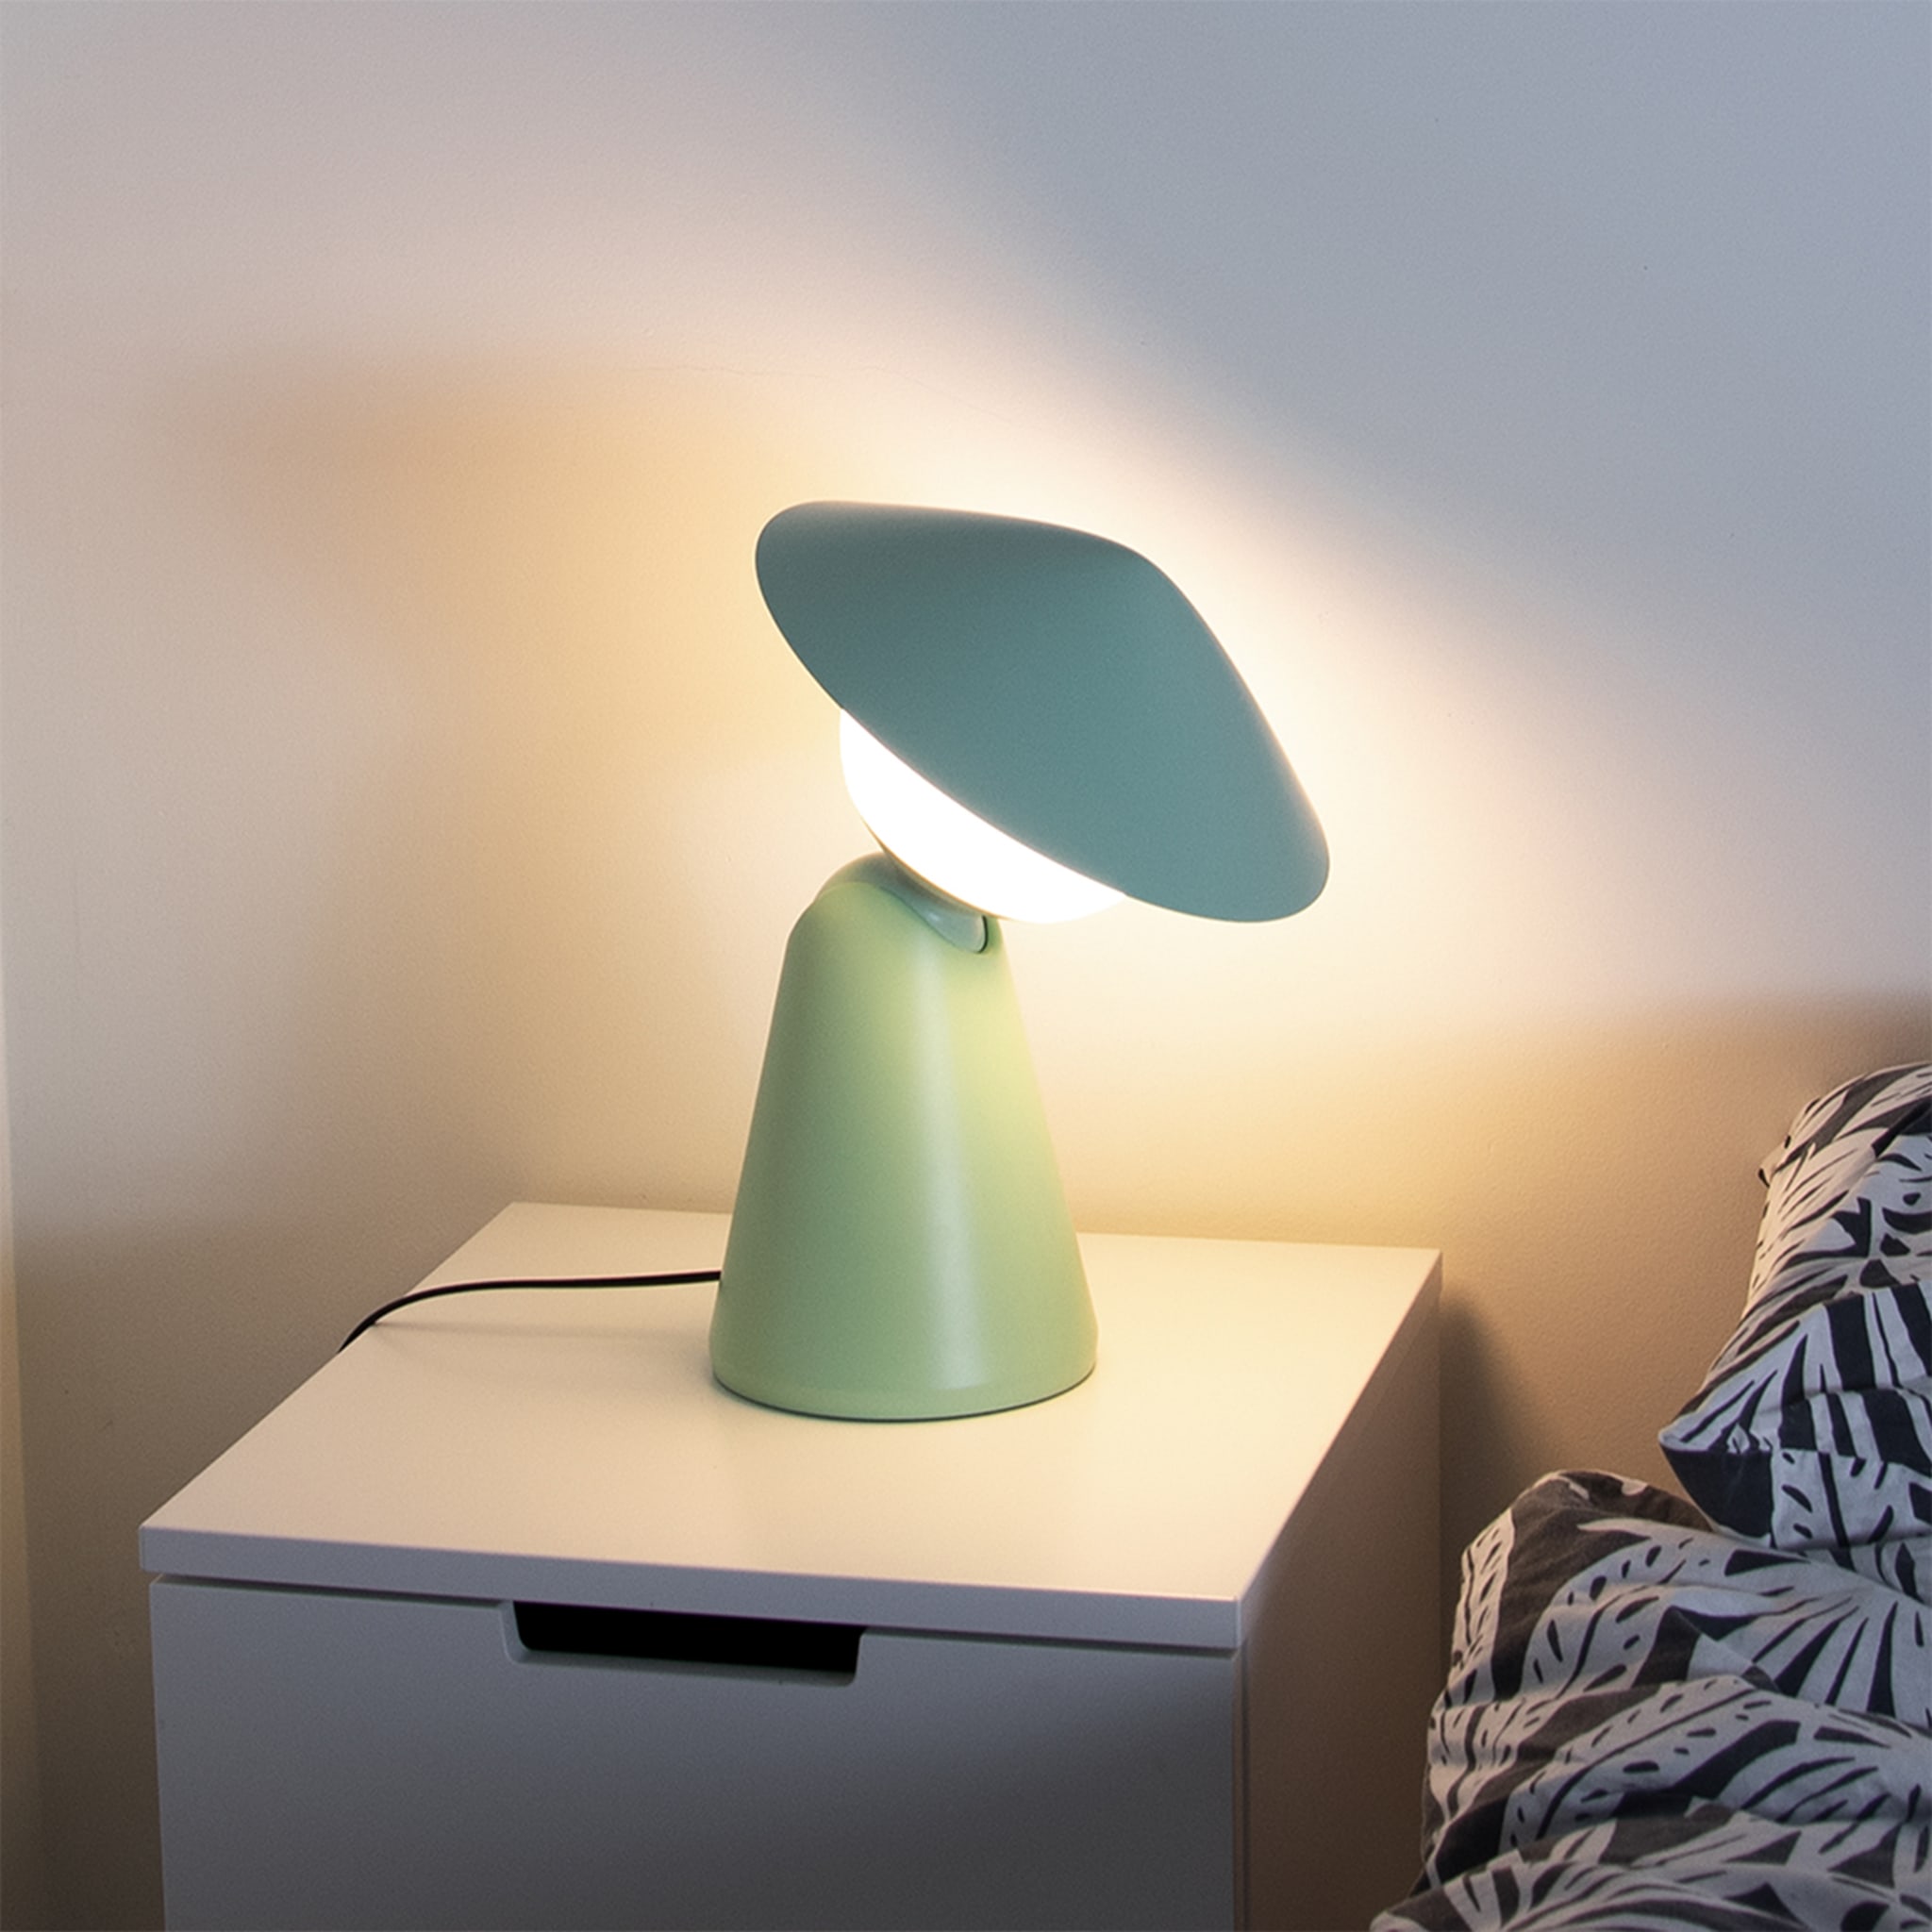 Puddy Light-Green Rechargeable Table Lamp by Albore Design - Alternative view 1